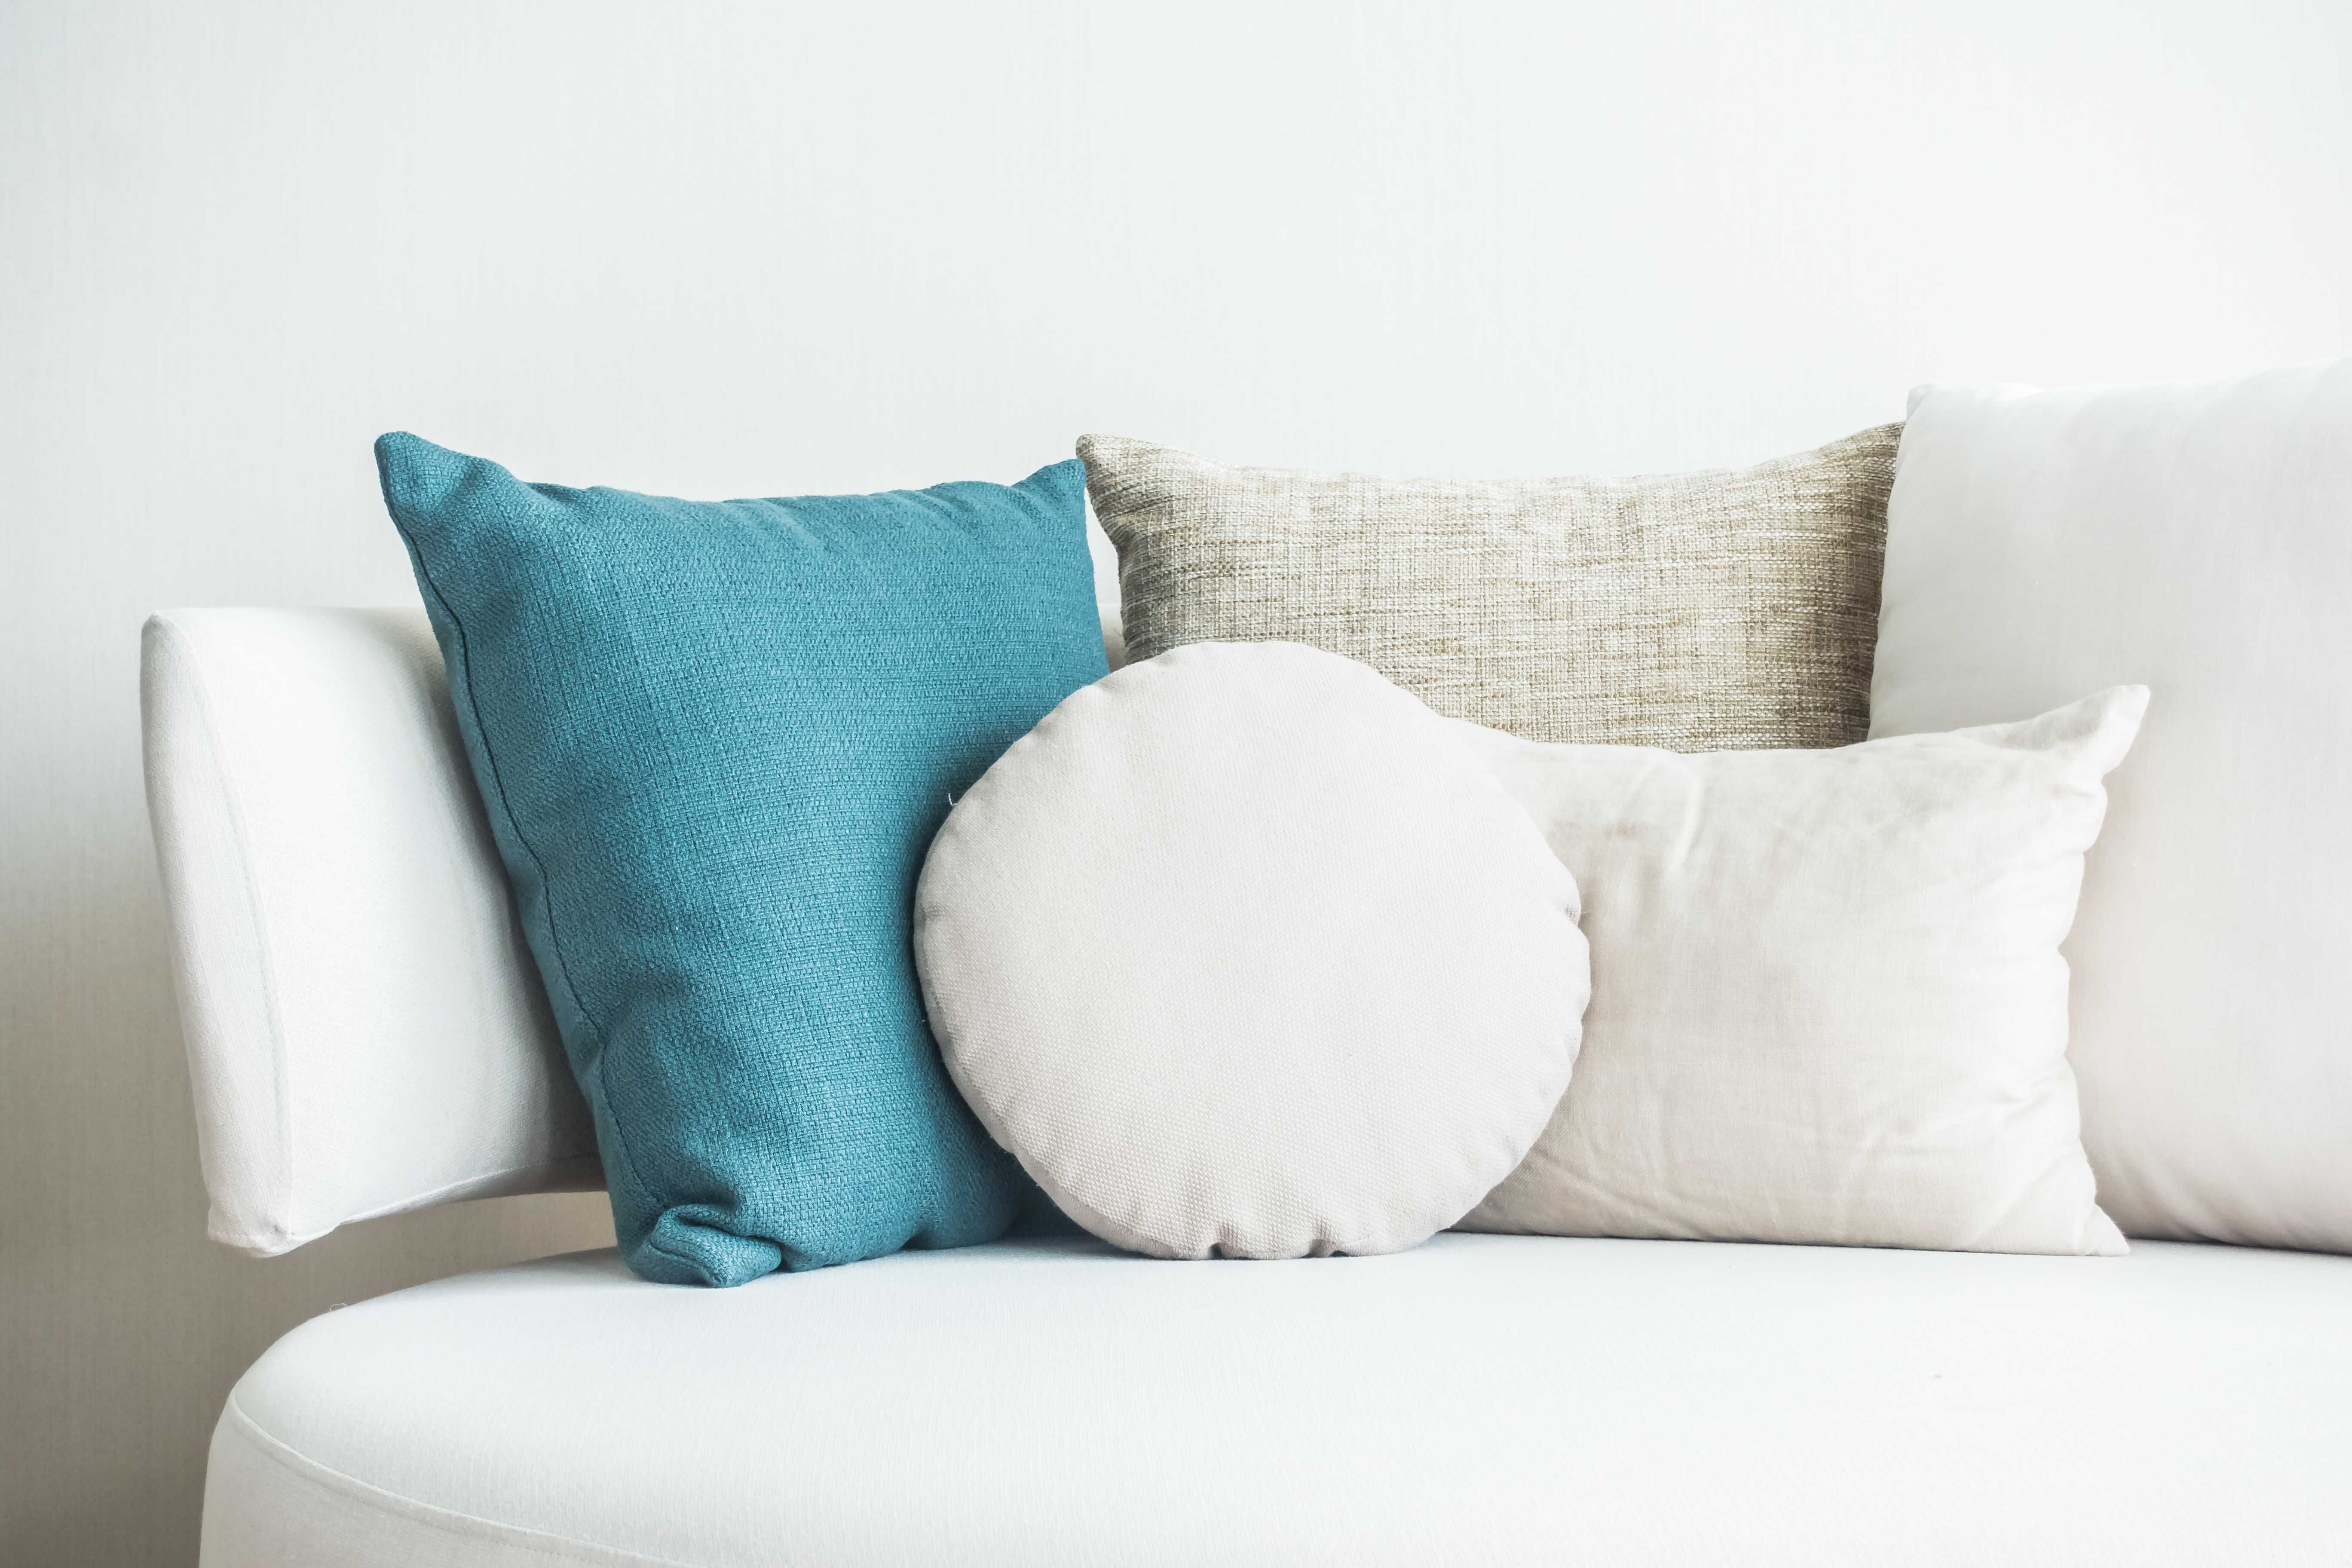 How to Keep Your Sofa Clean?